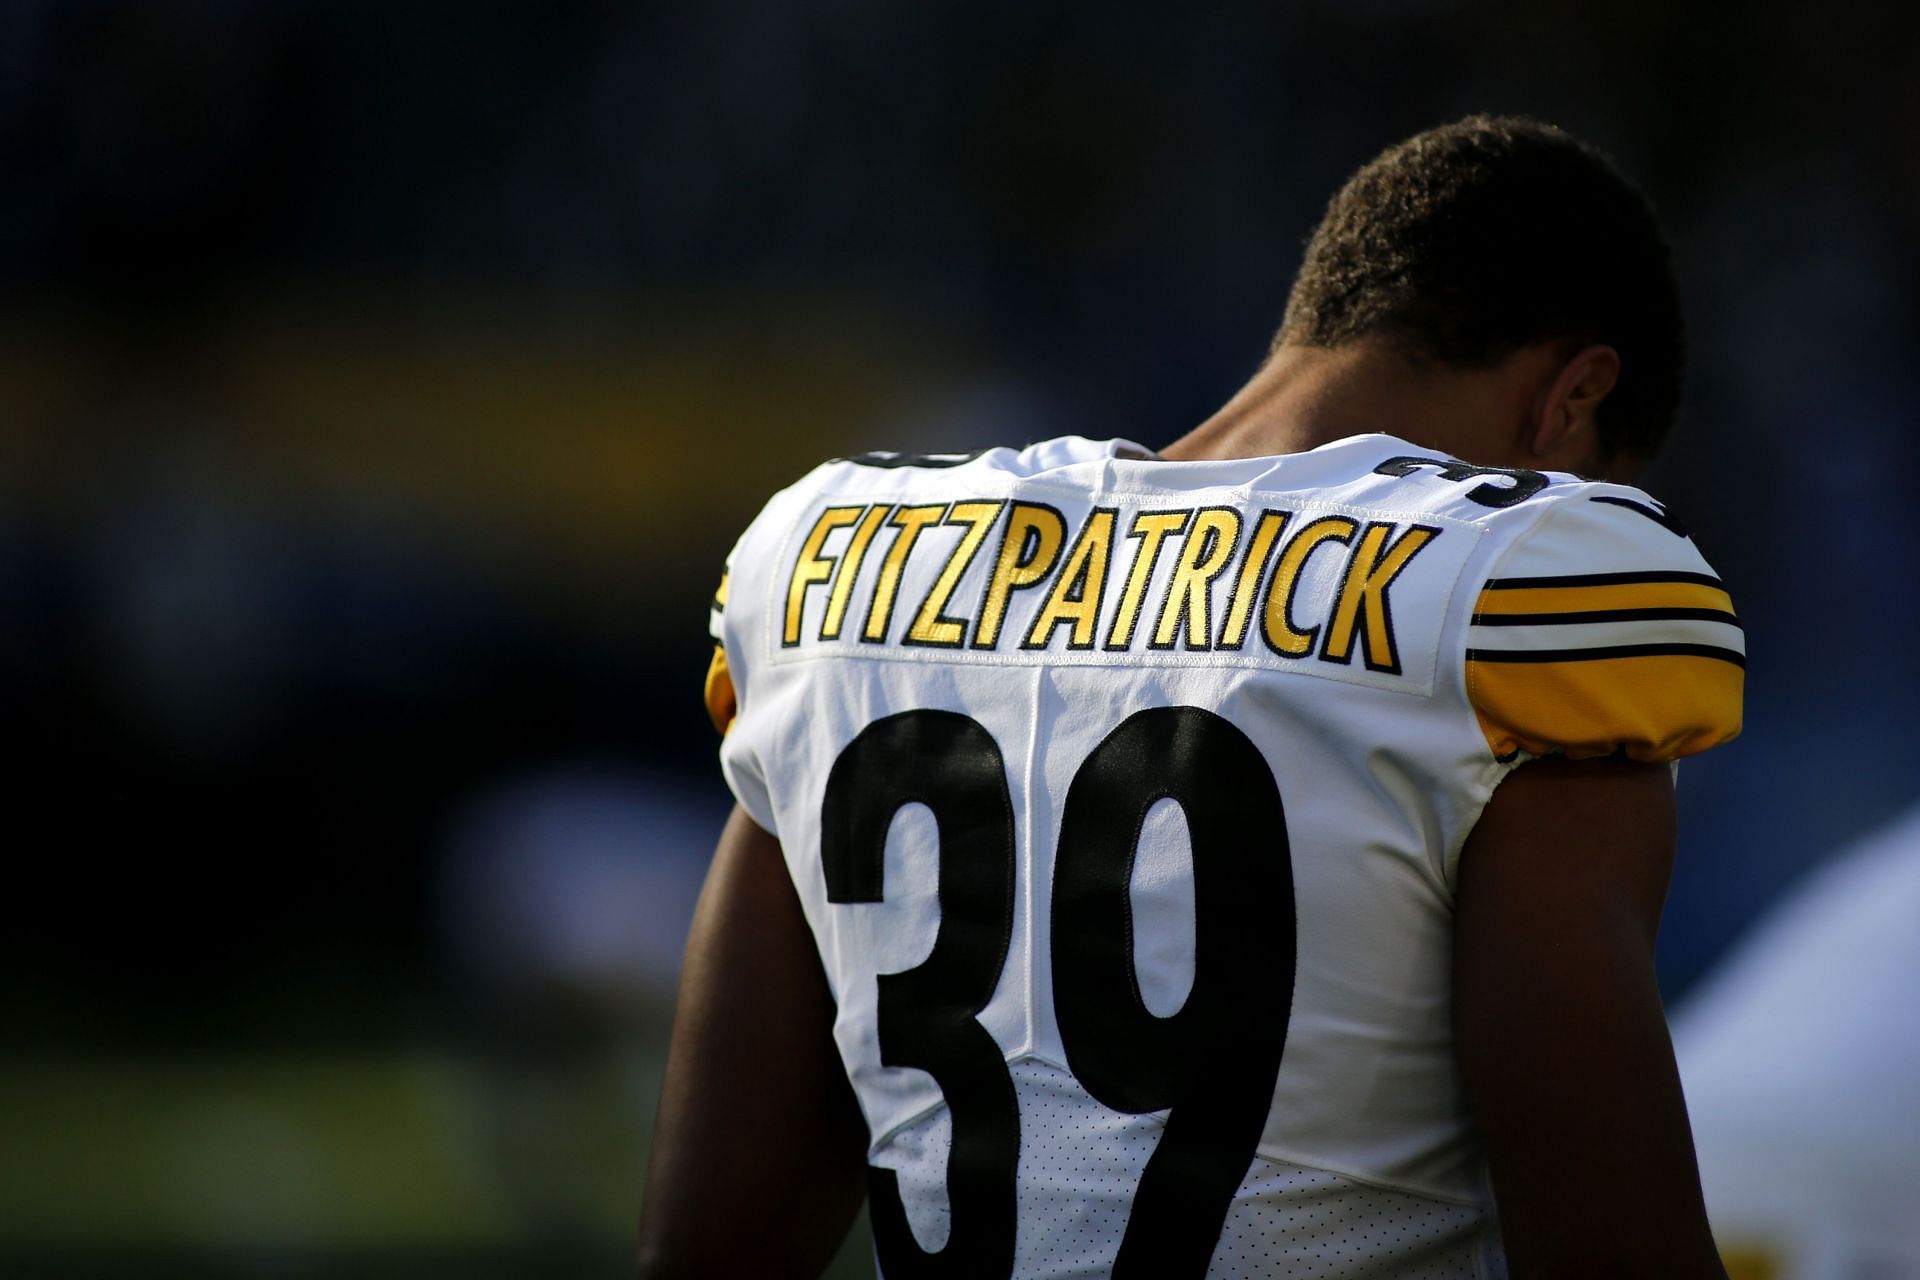 Minkah Fitzpatrick has signed a very lucrative contract with the Steelers